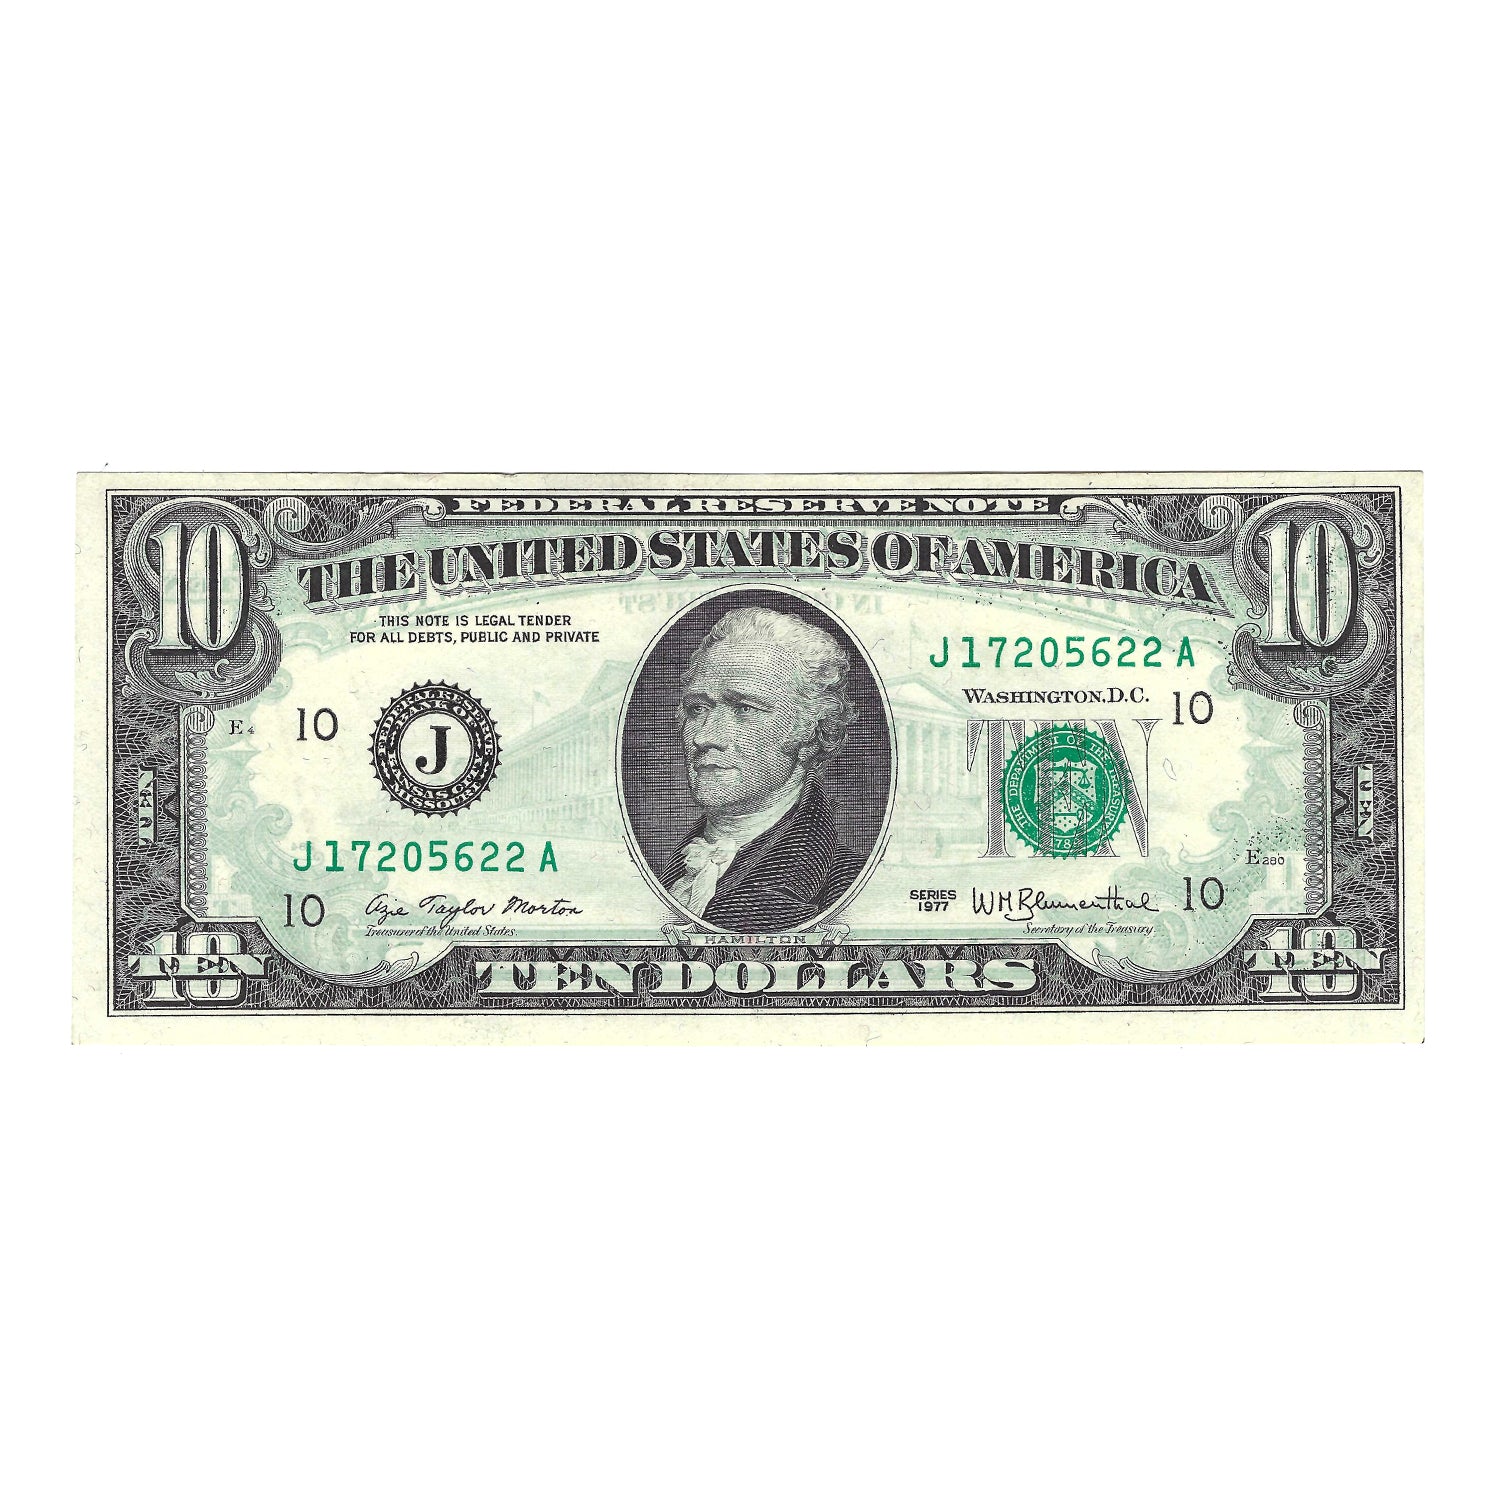 1977 $10 Small Size Federal Reserve Note, Morton-Blumenthal, Wet Ink Transfer Error